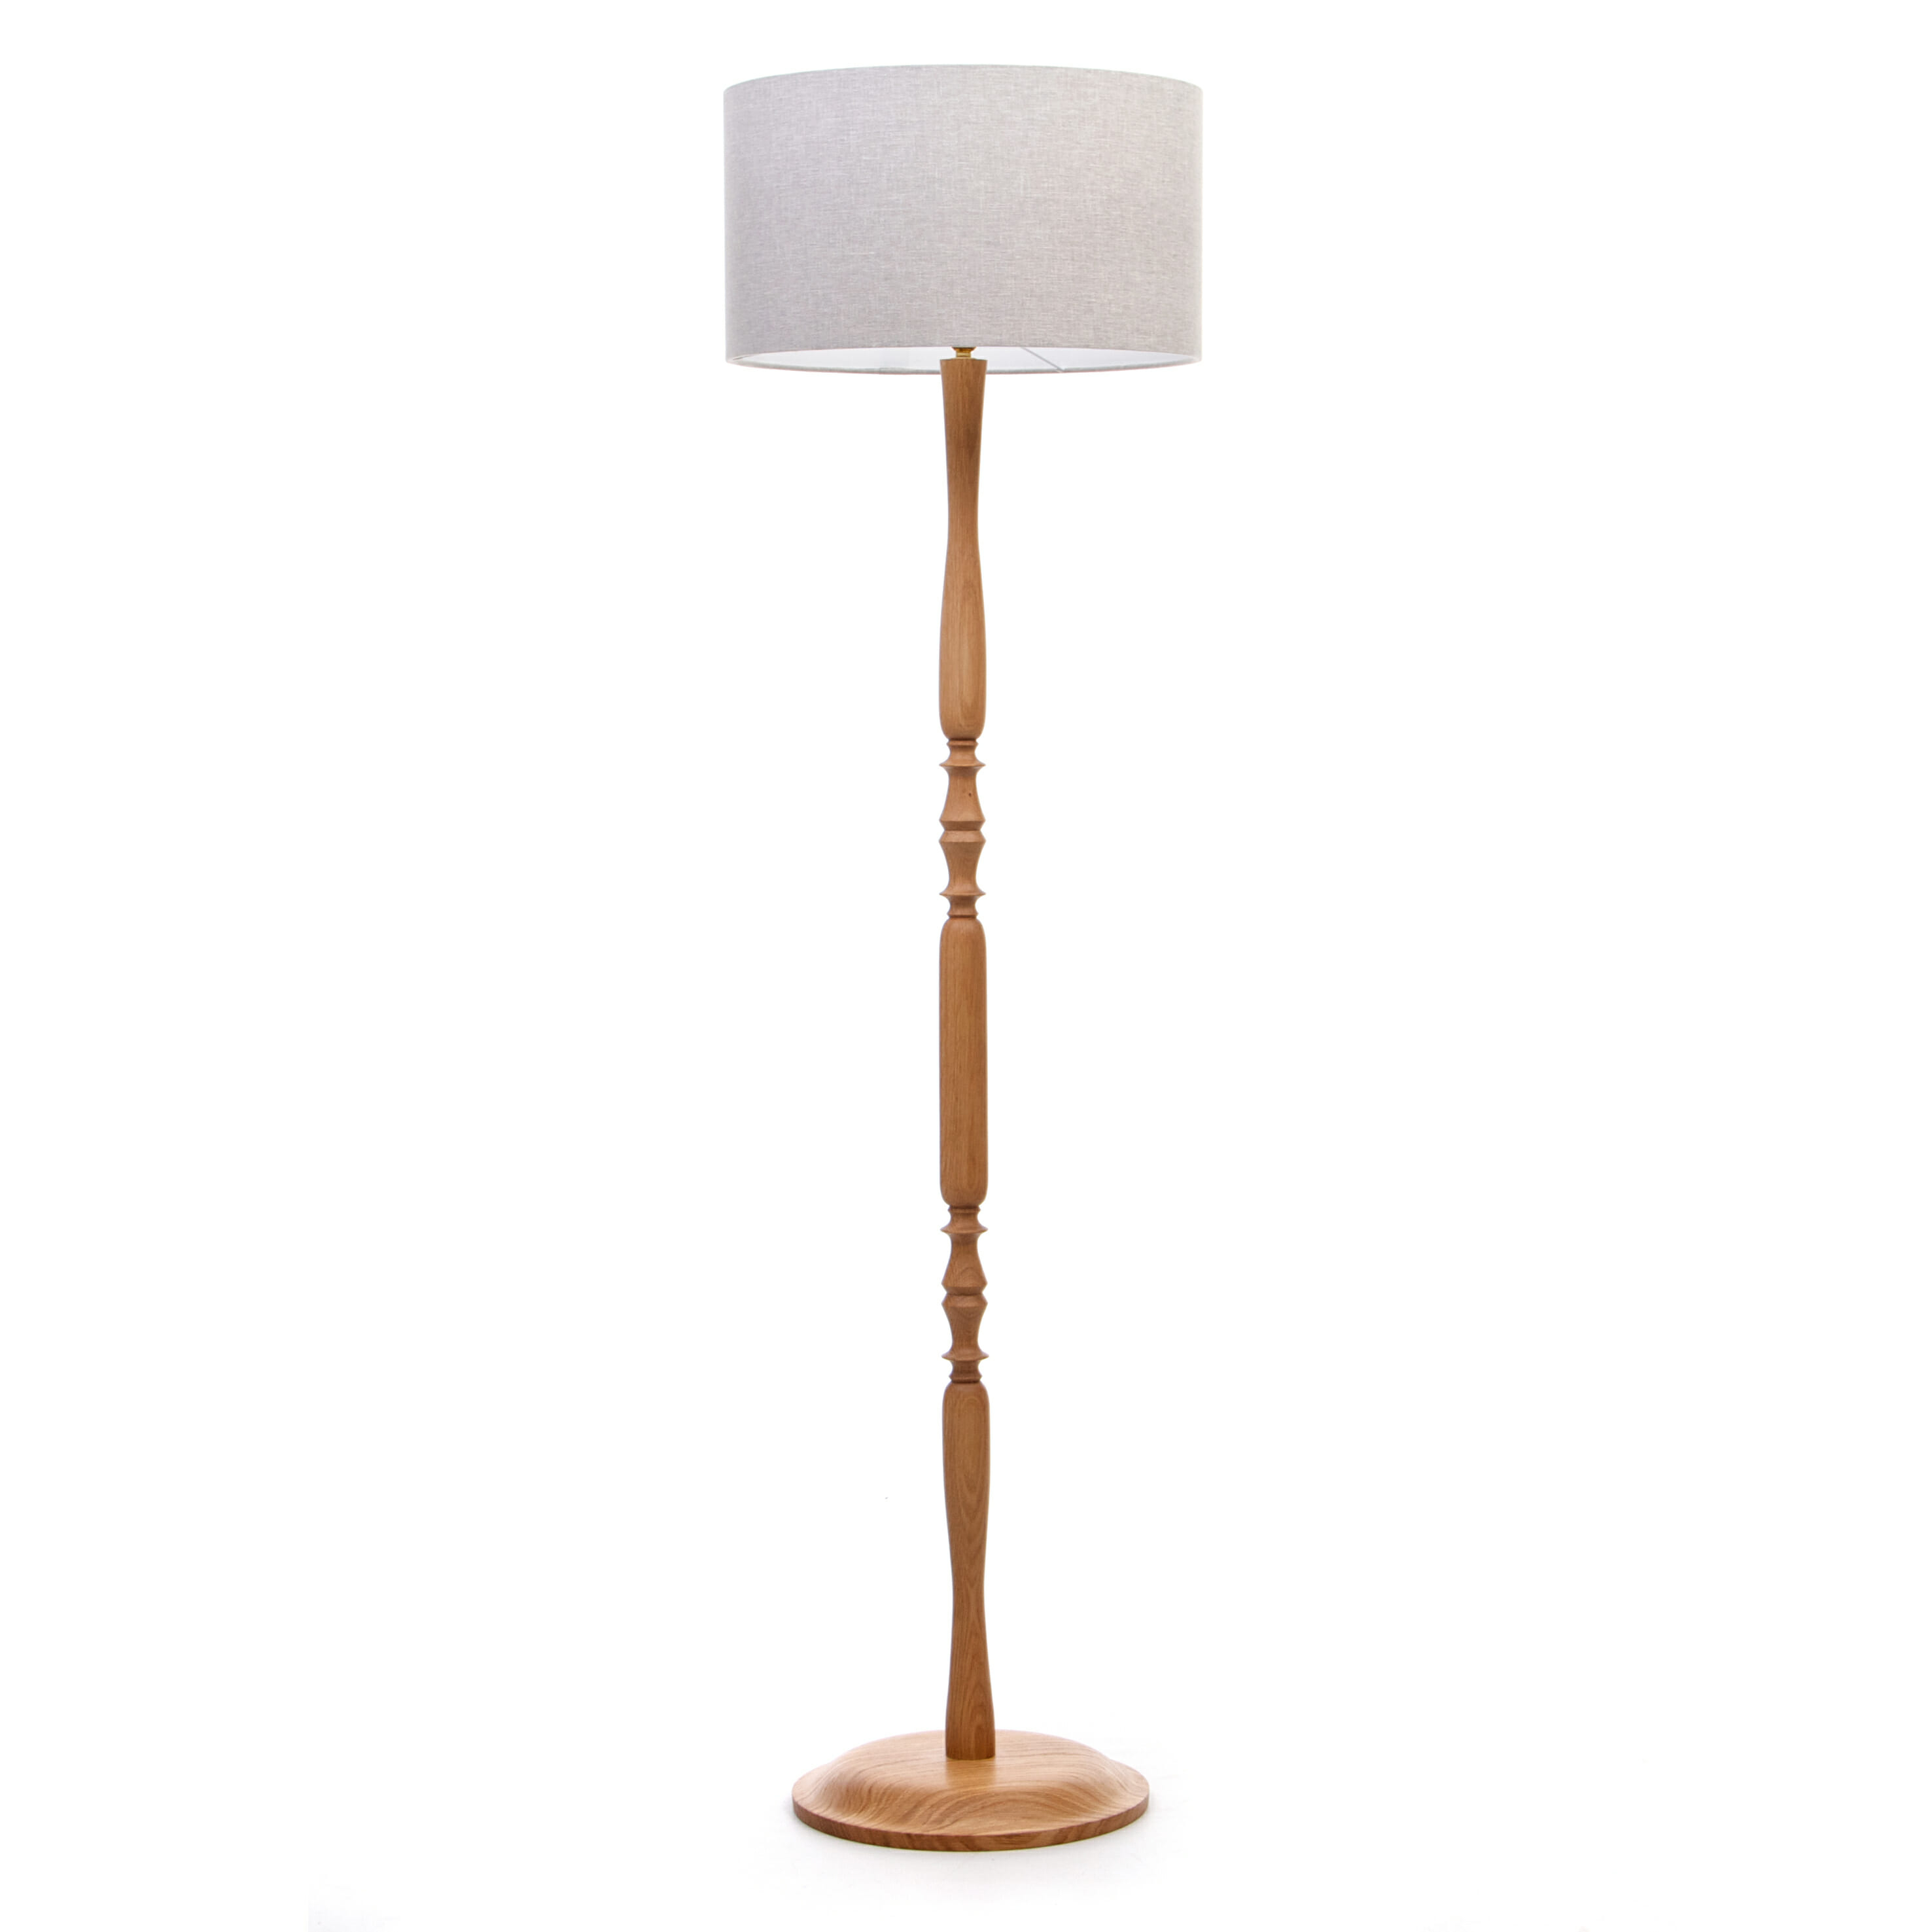 Classic Oak Floor Lamp intended for size 2953 X 2953